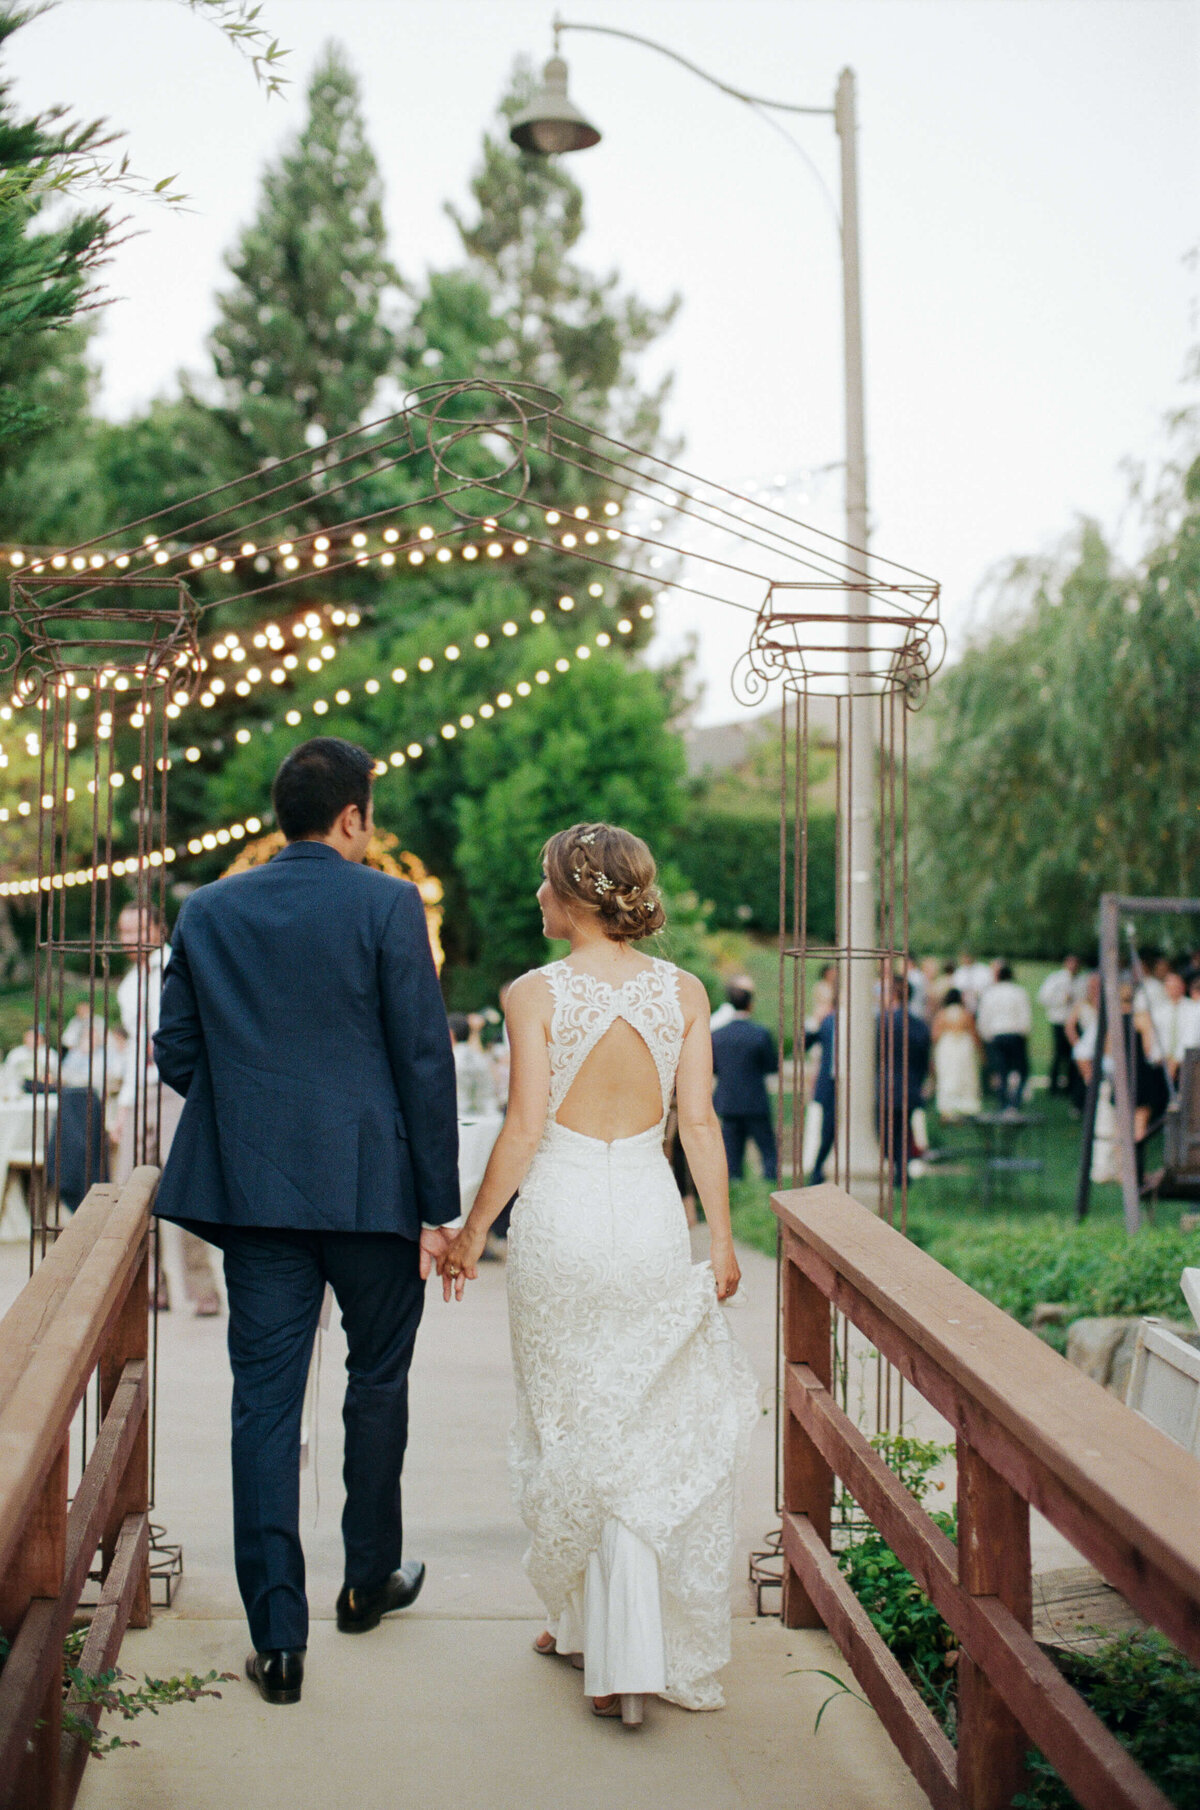 Husband and wife in their wedding attires walk past a narrow wooden bridge to join their guests for an outdoor reception party.